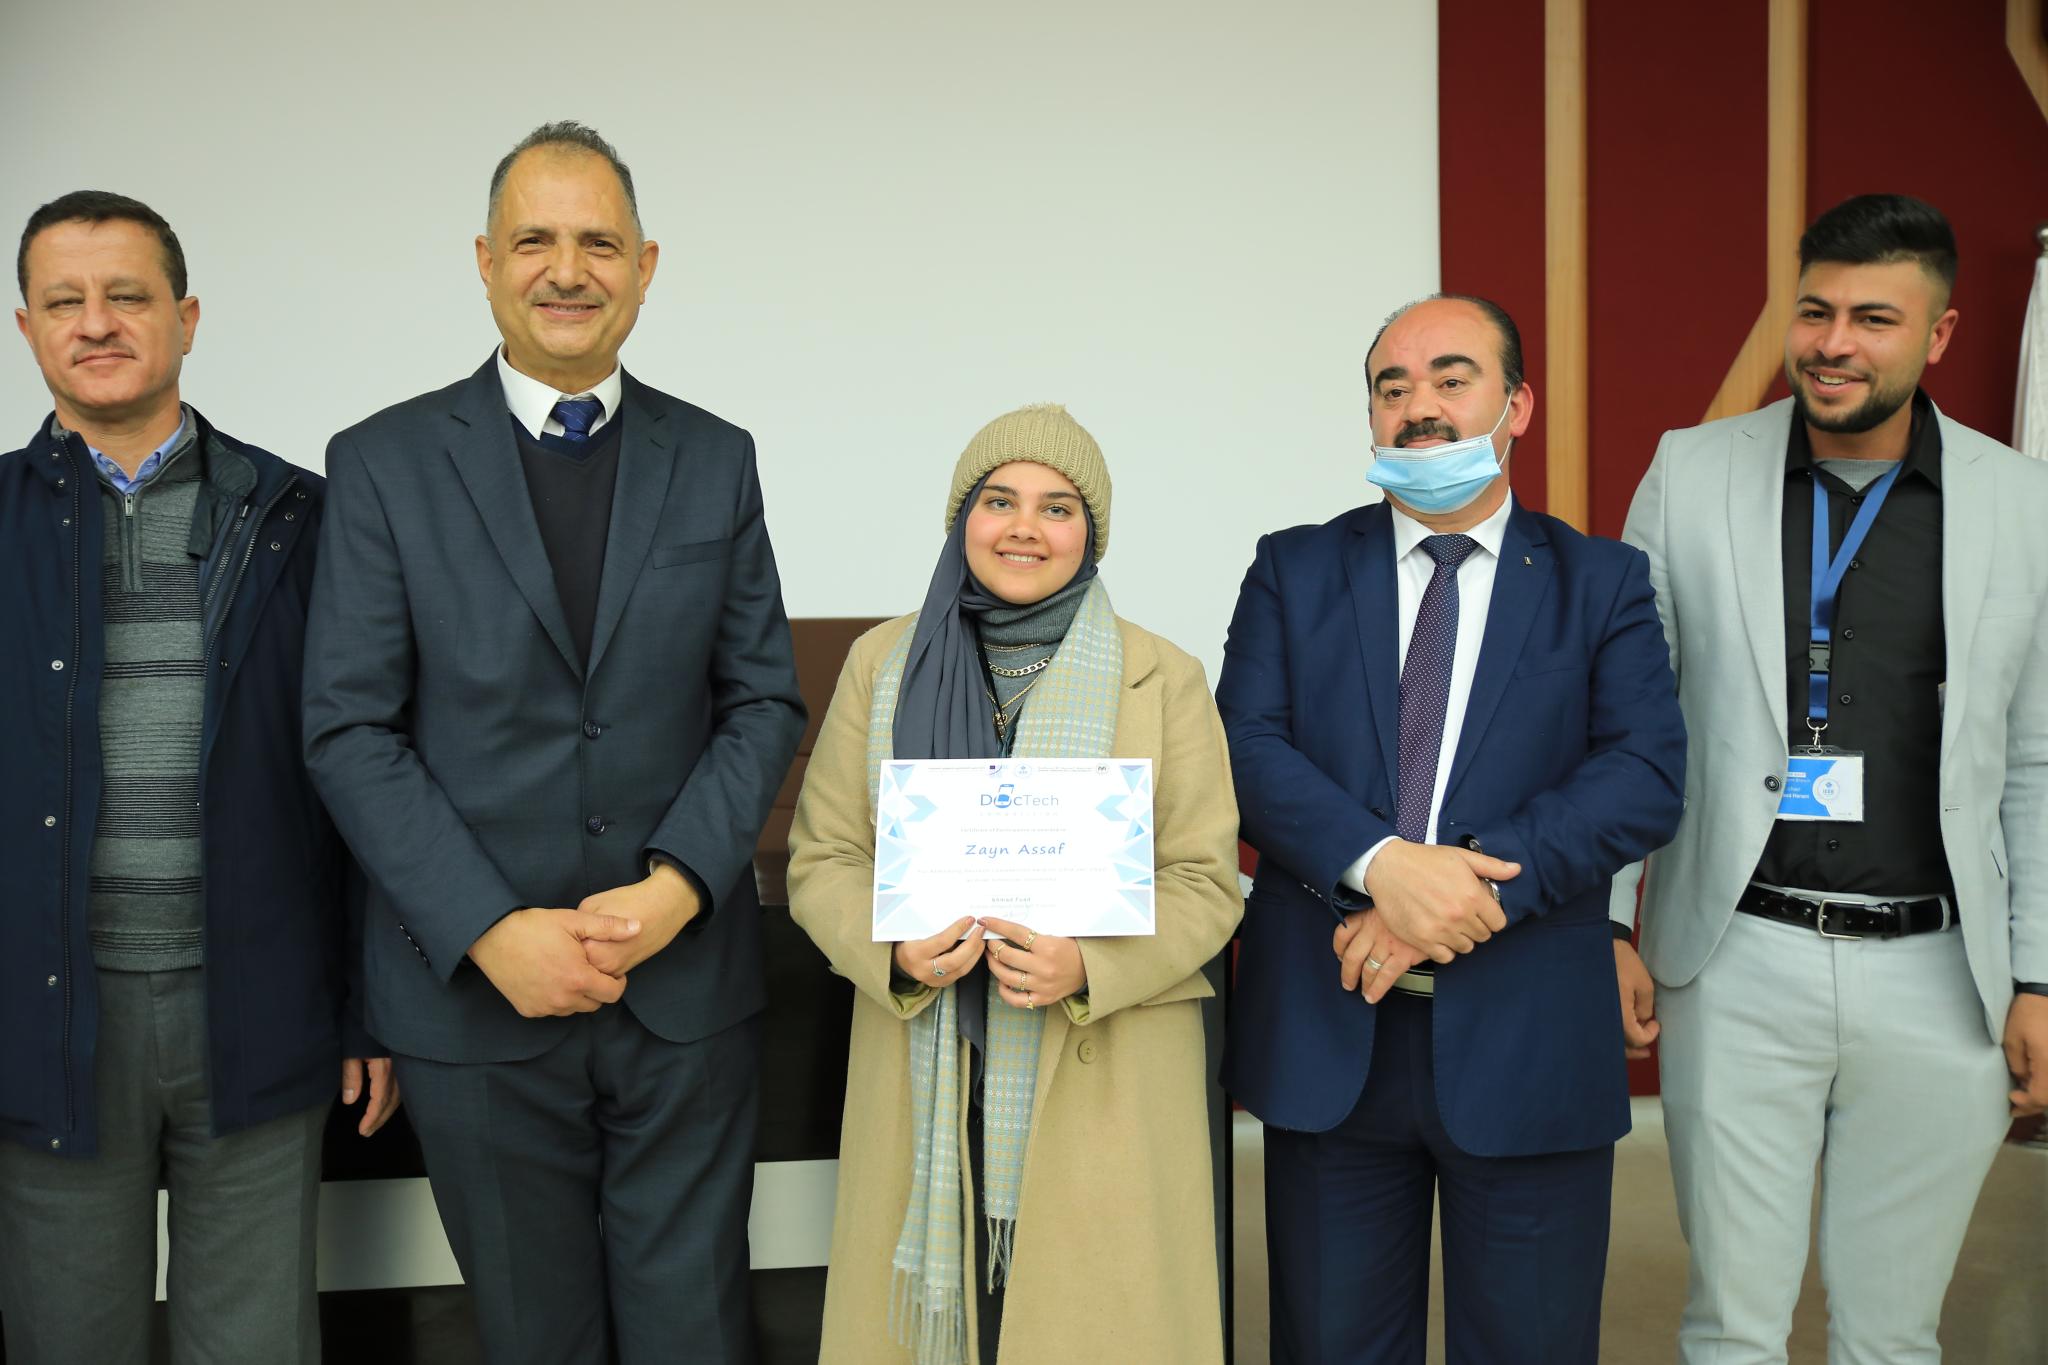 AAUP Organizes the Final Ceremony for the Competition of the Best Idea of a Technological Application in the Medical Field "DocTech"